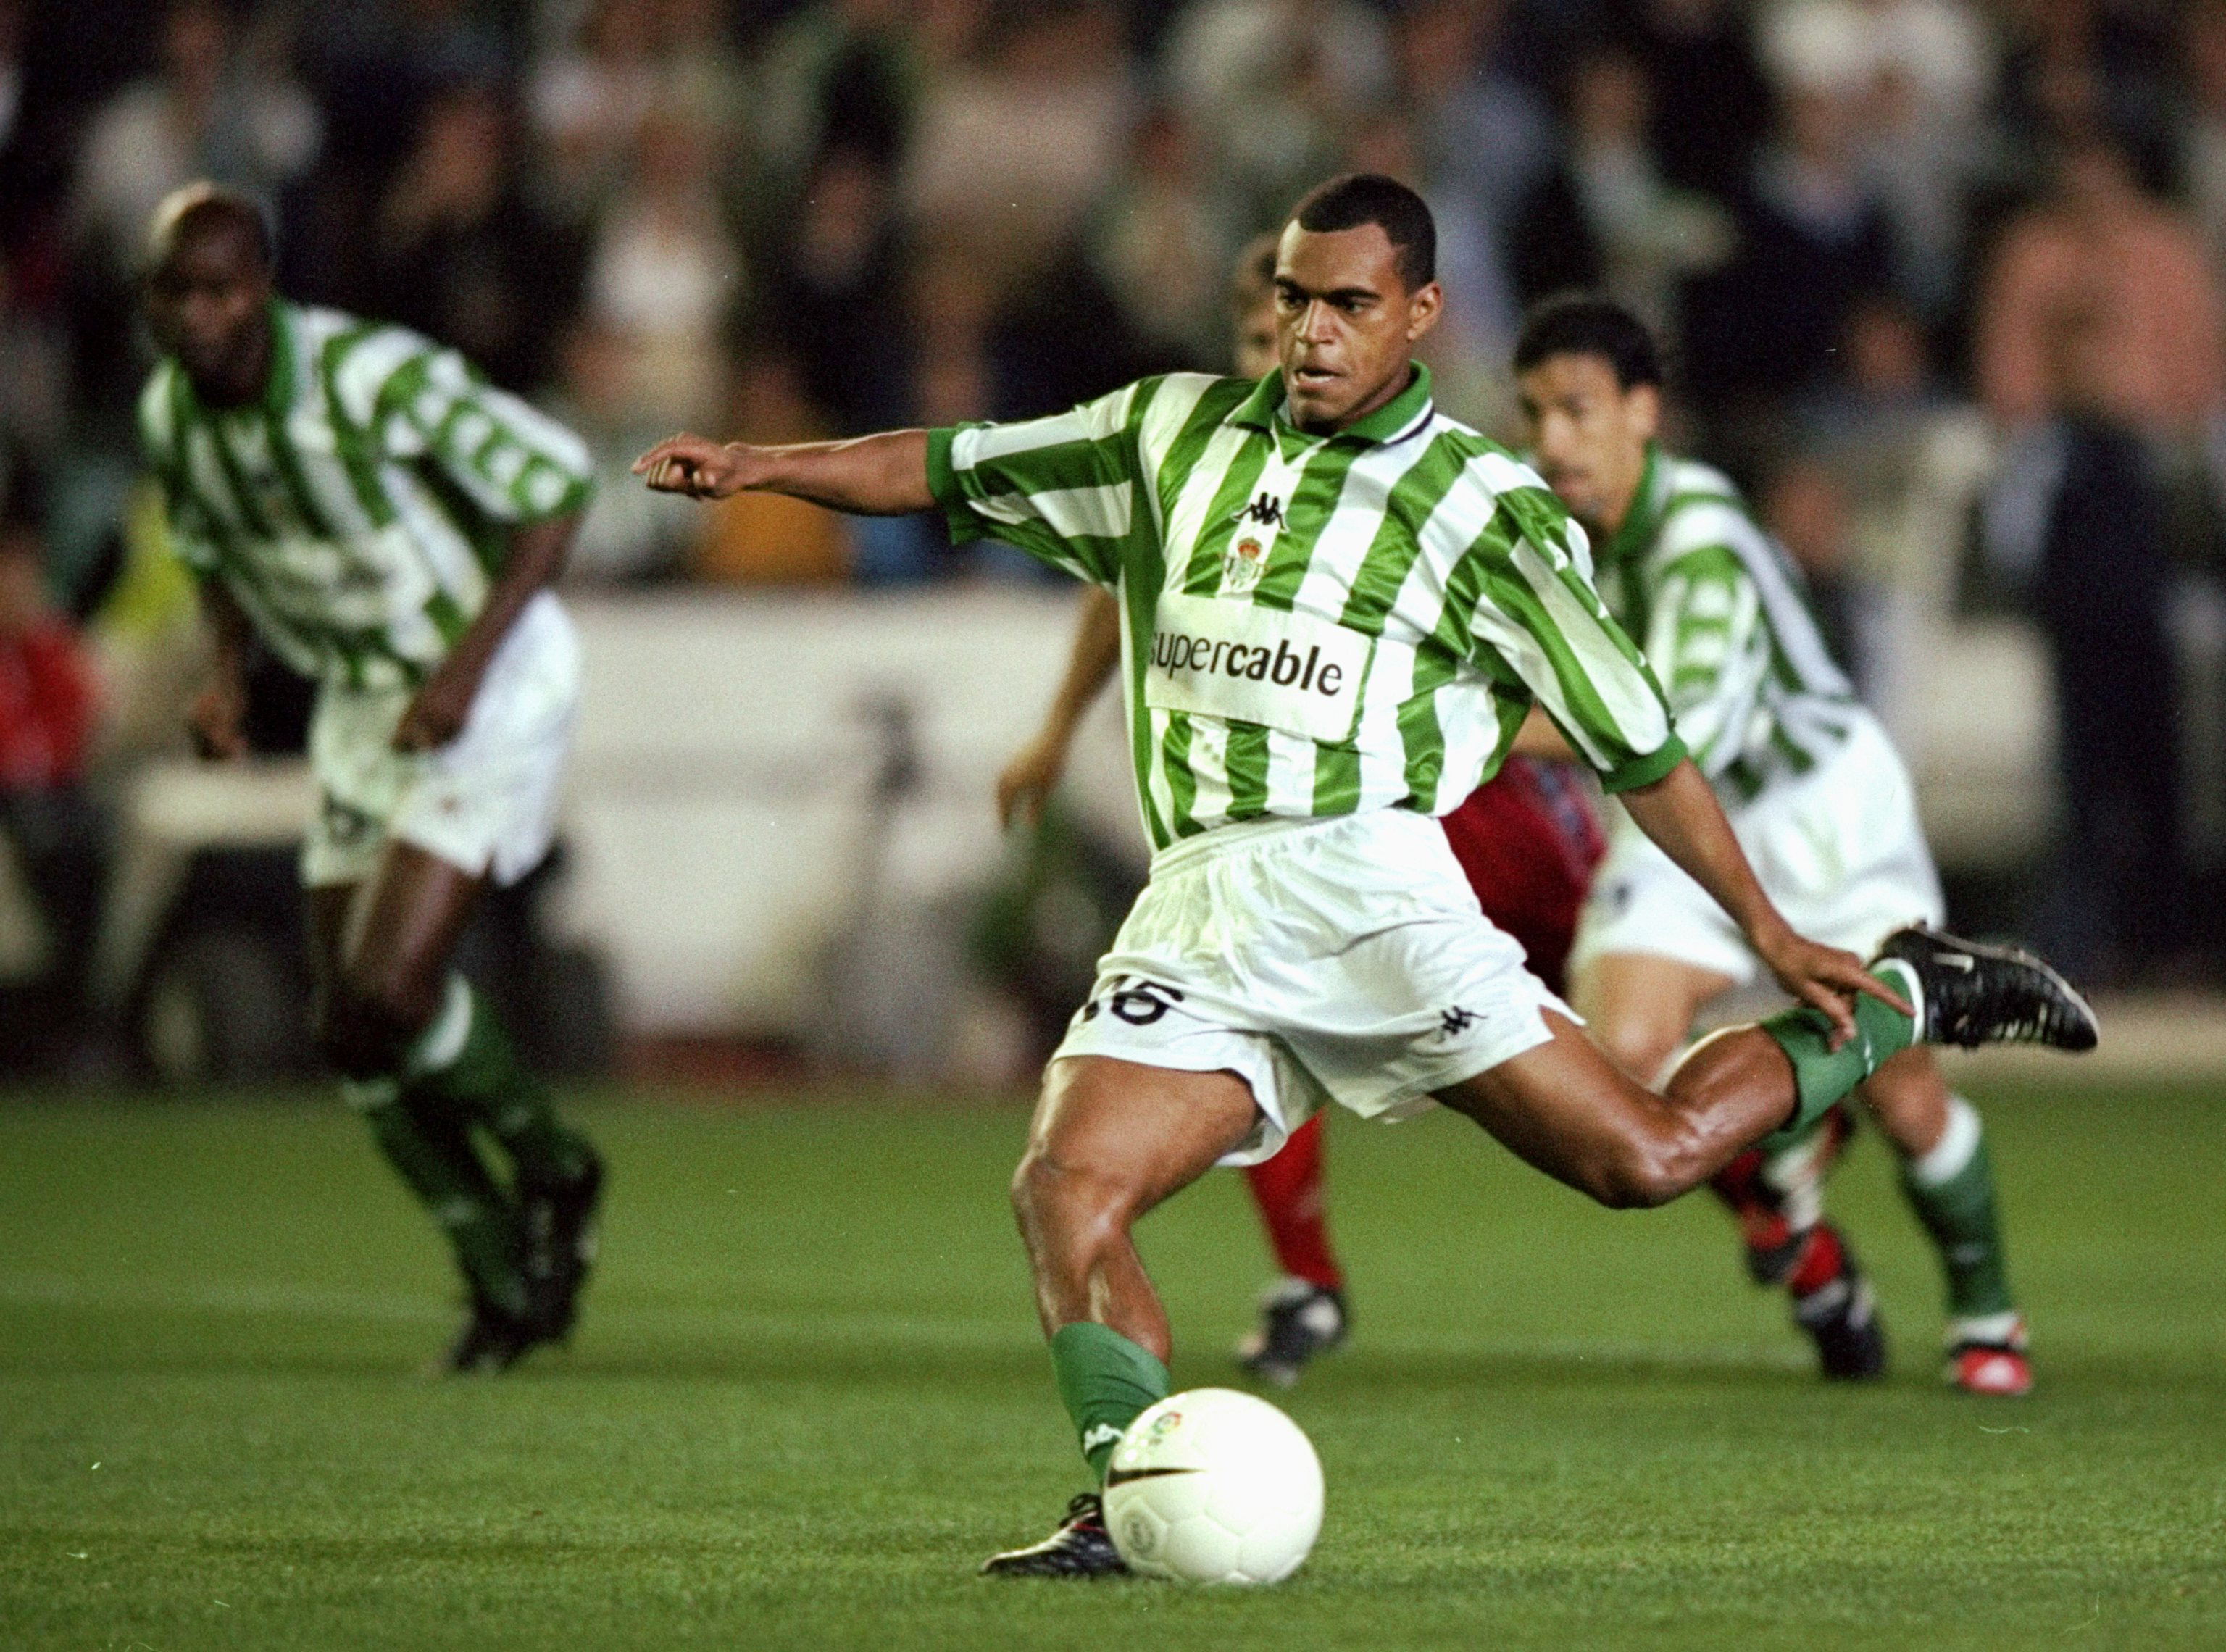 Denilson scores a penalty for Real Betis against Sevilla in February 2000.